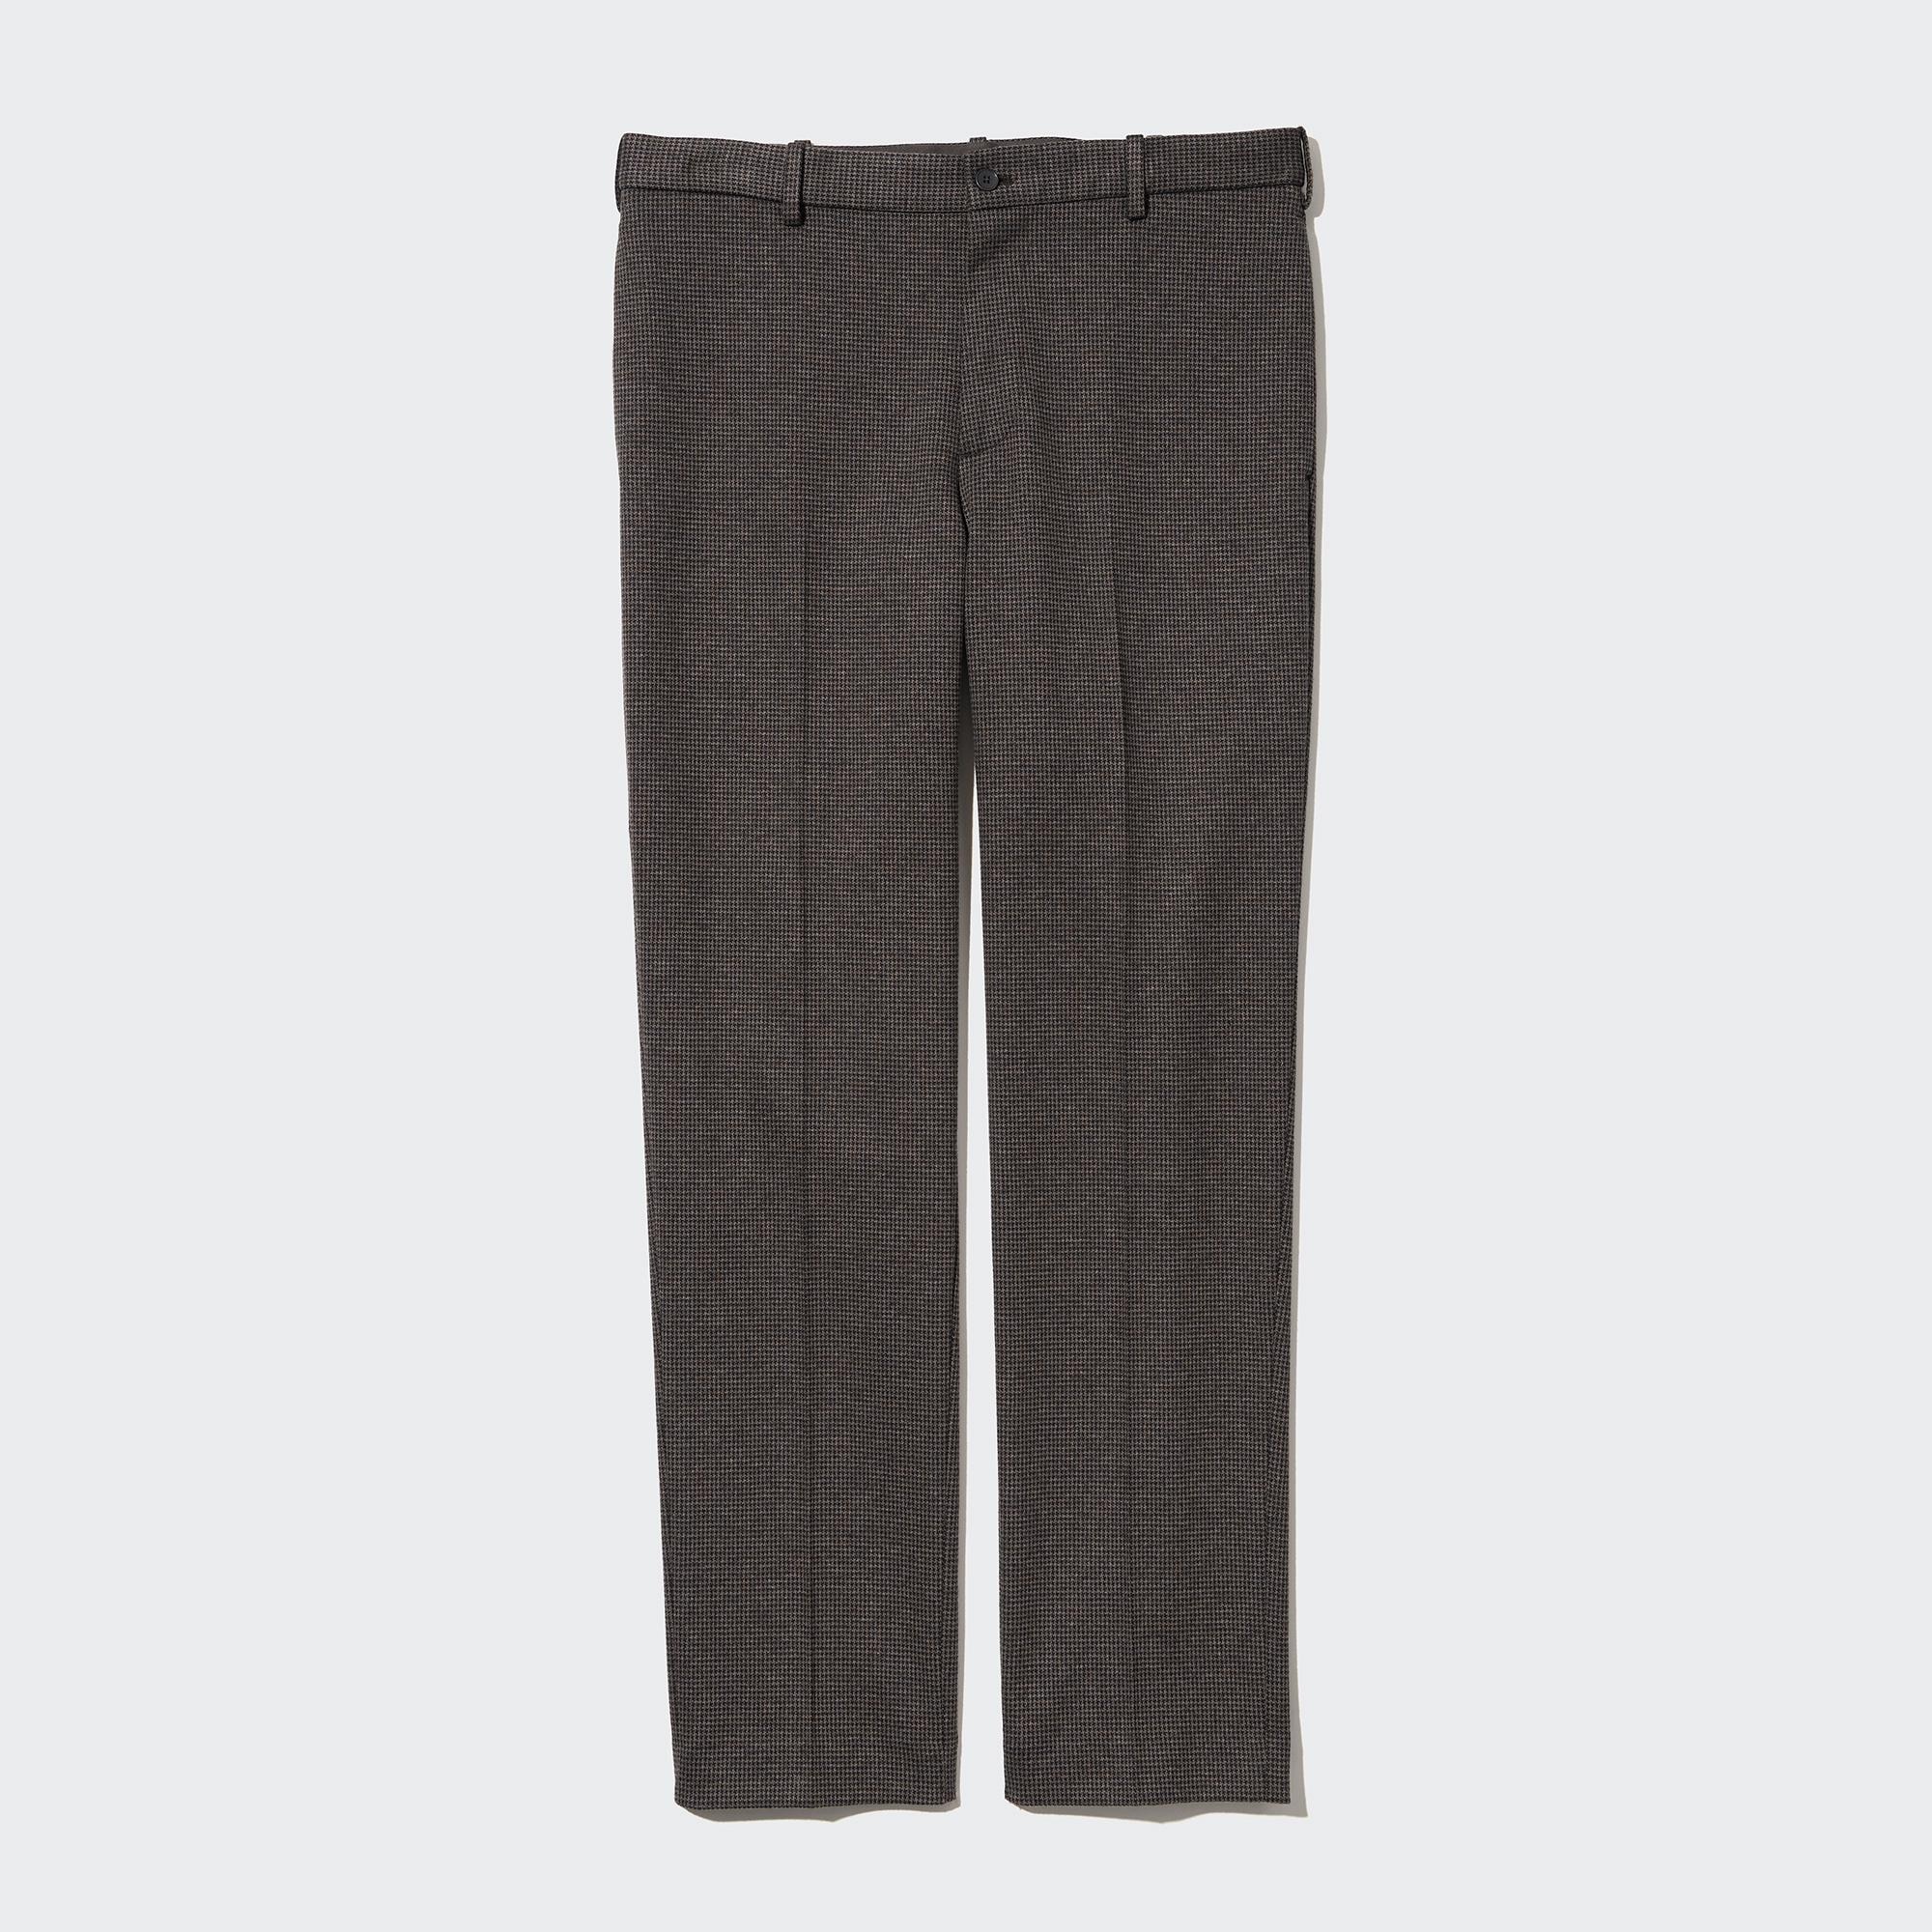 Smart Houndstooth Ankle Length Trousers (Long) | UNIQLO EU